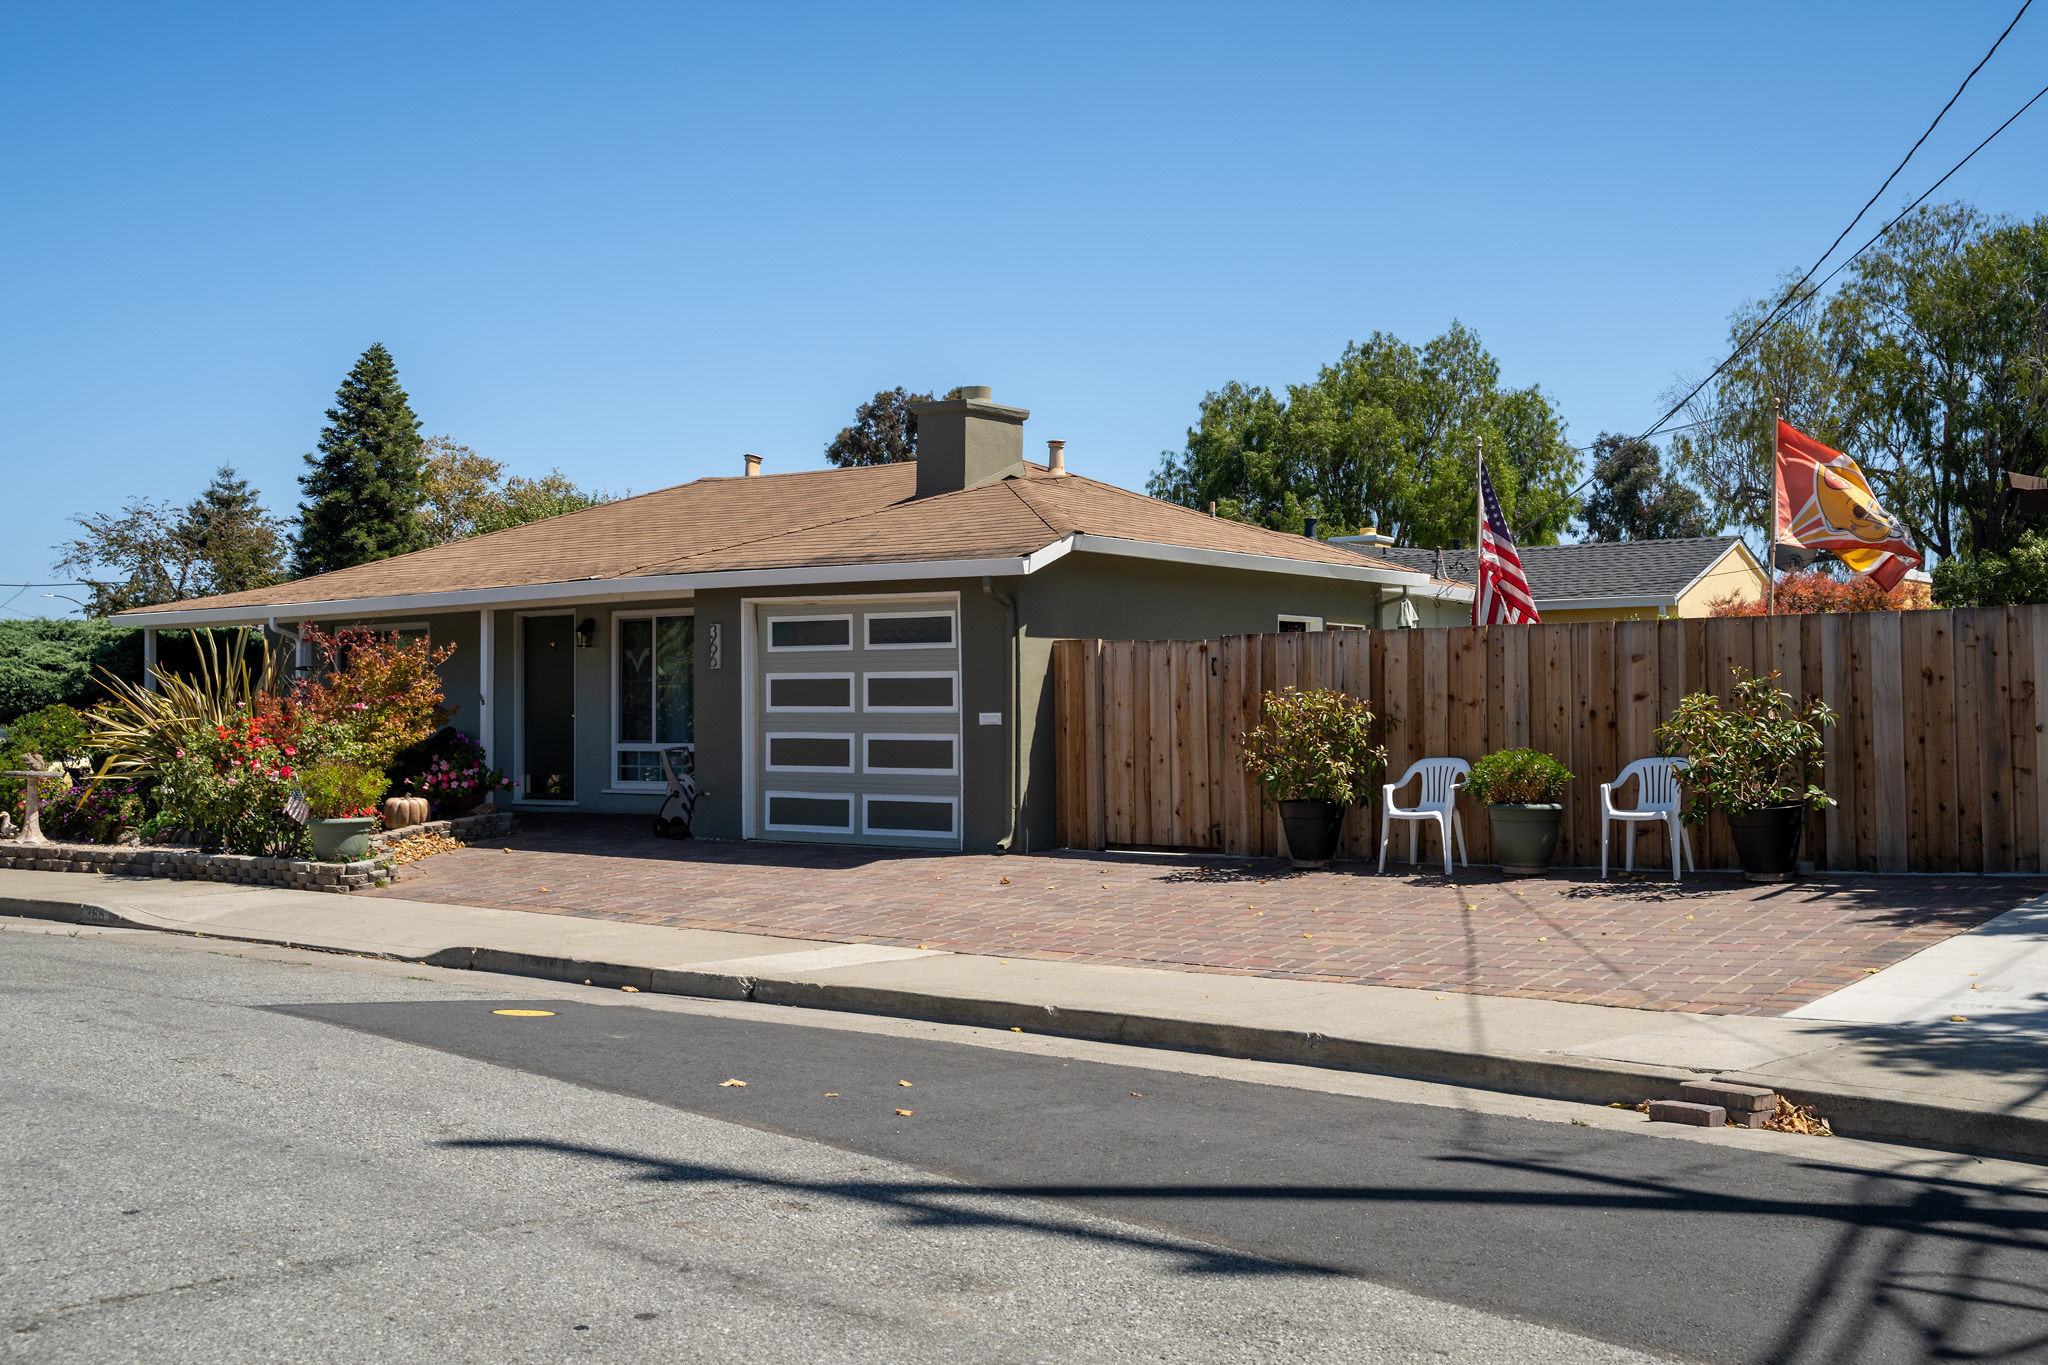 Ranch style home with american flag in The Village area in San Mateo